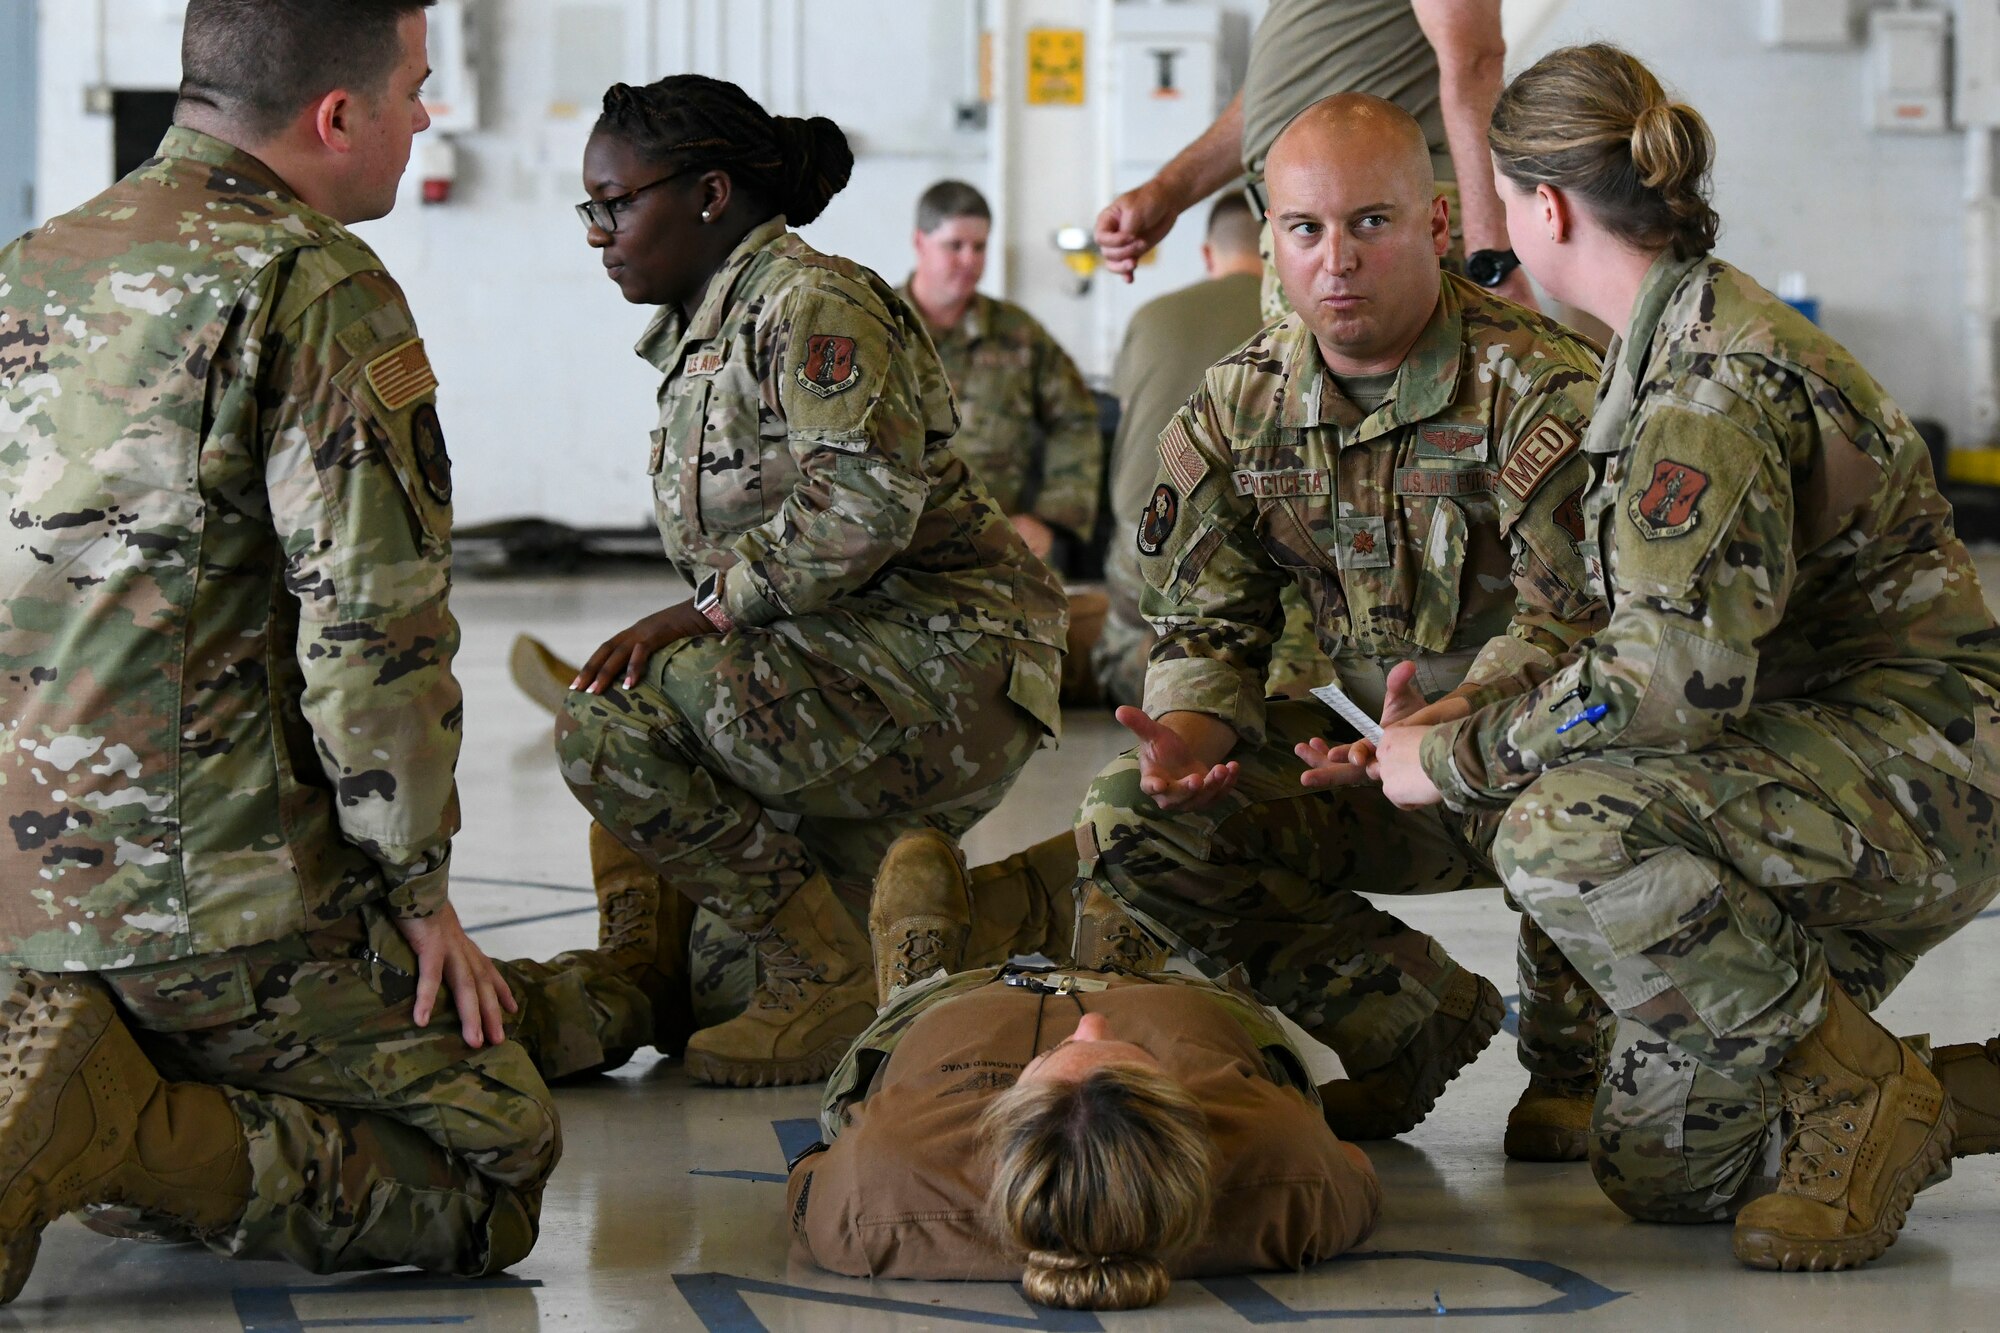 Airmen assigned to the 183rd Aeromedical Evacuation Squadron participate in a mass-casualty training exercise at MacDill Air Force Base, June 19. The Airmen completed their annual training, where they honed their skills in patient care. (U.S. Air National Guard photo by 1st Lt. Kiara N. Spann)